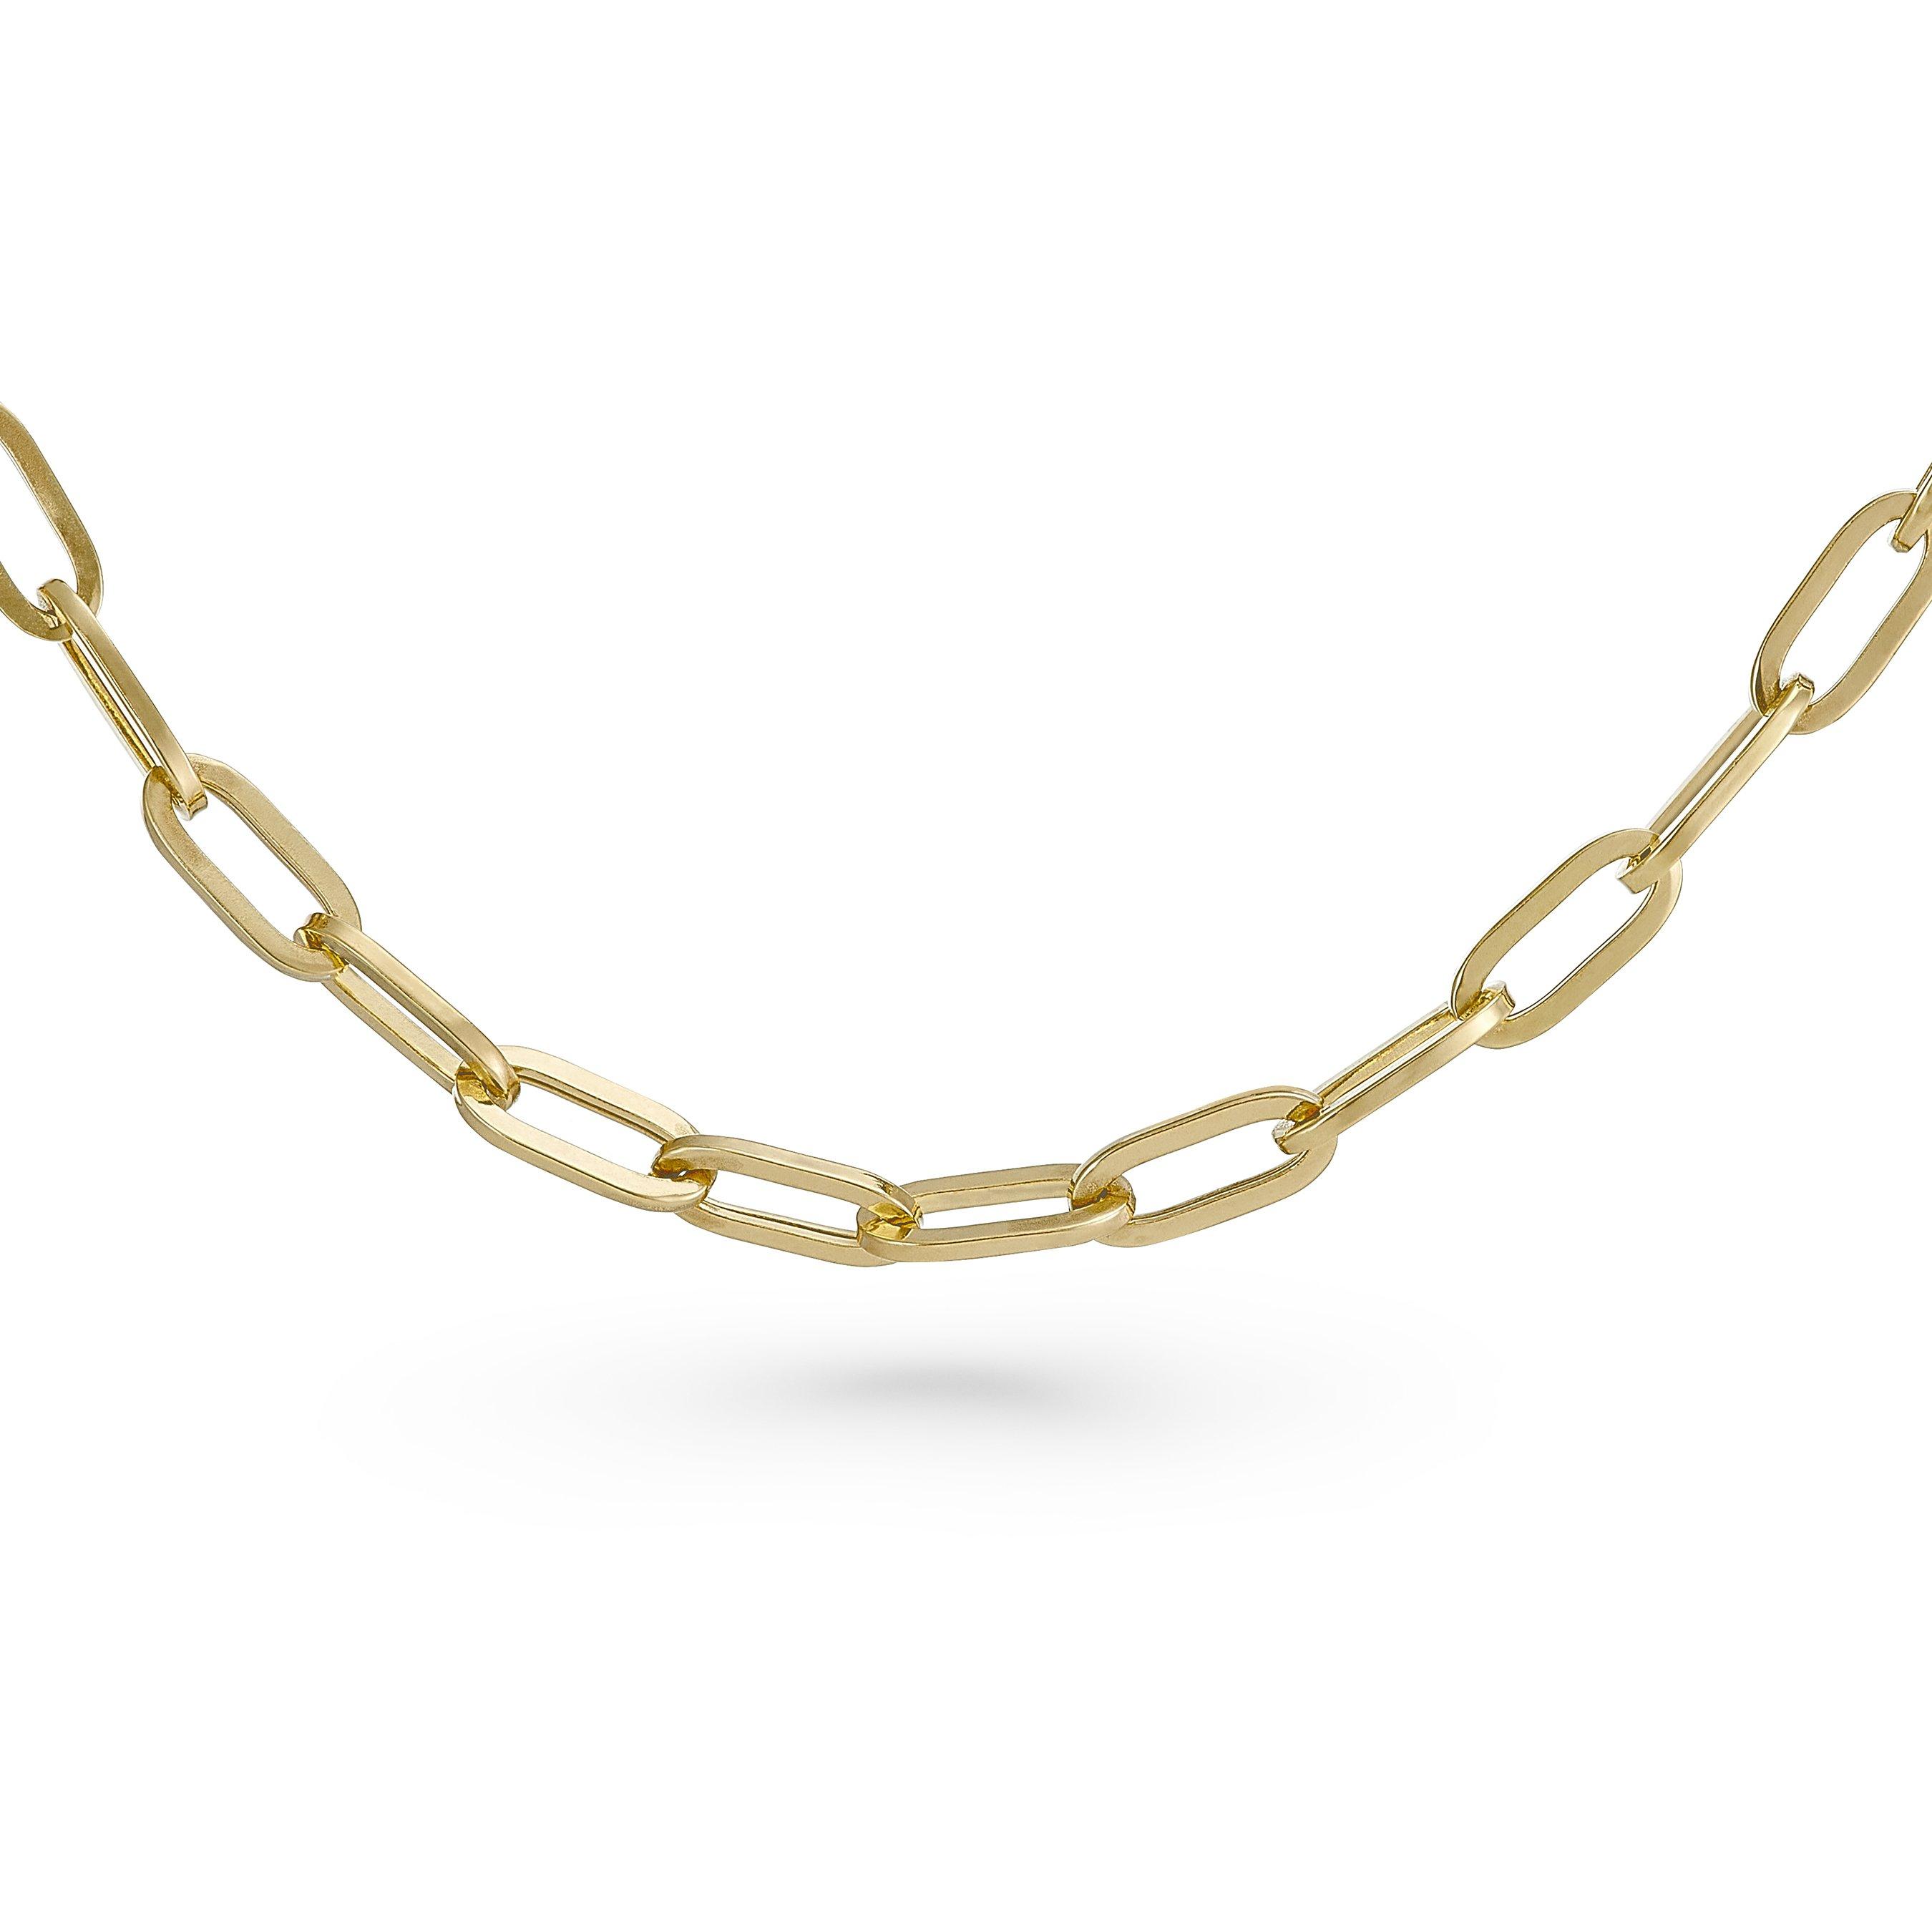 9ct Yellow Gold Paperchain Bracelet | 0138485 | Beaverbrooks the Jewellers